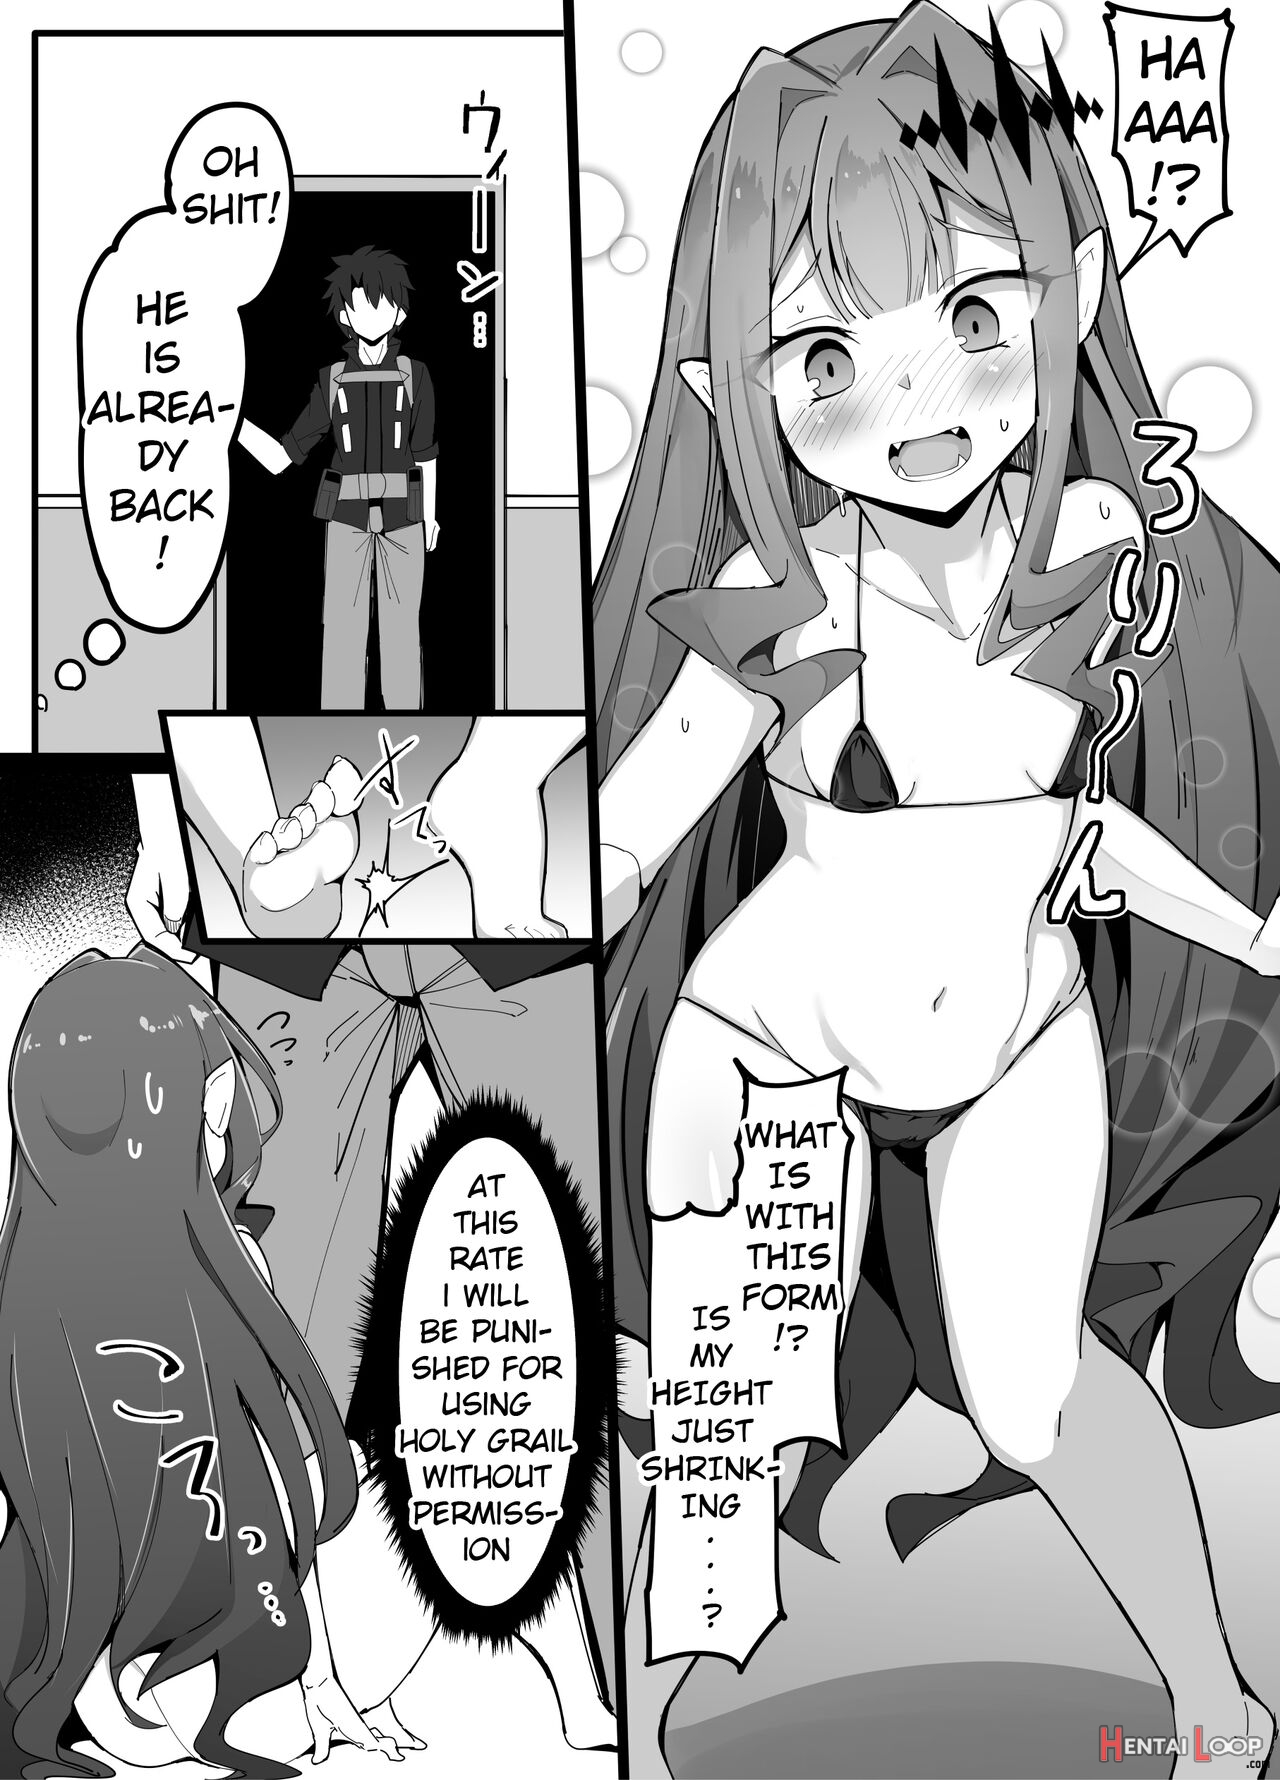 Young Fairy Knight Loli Tristan page 3